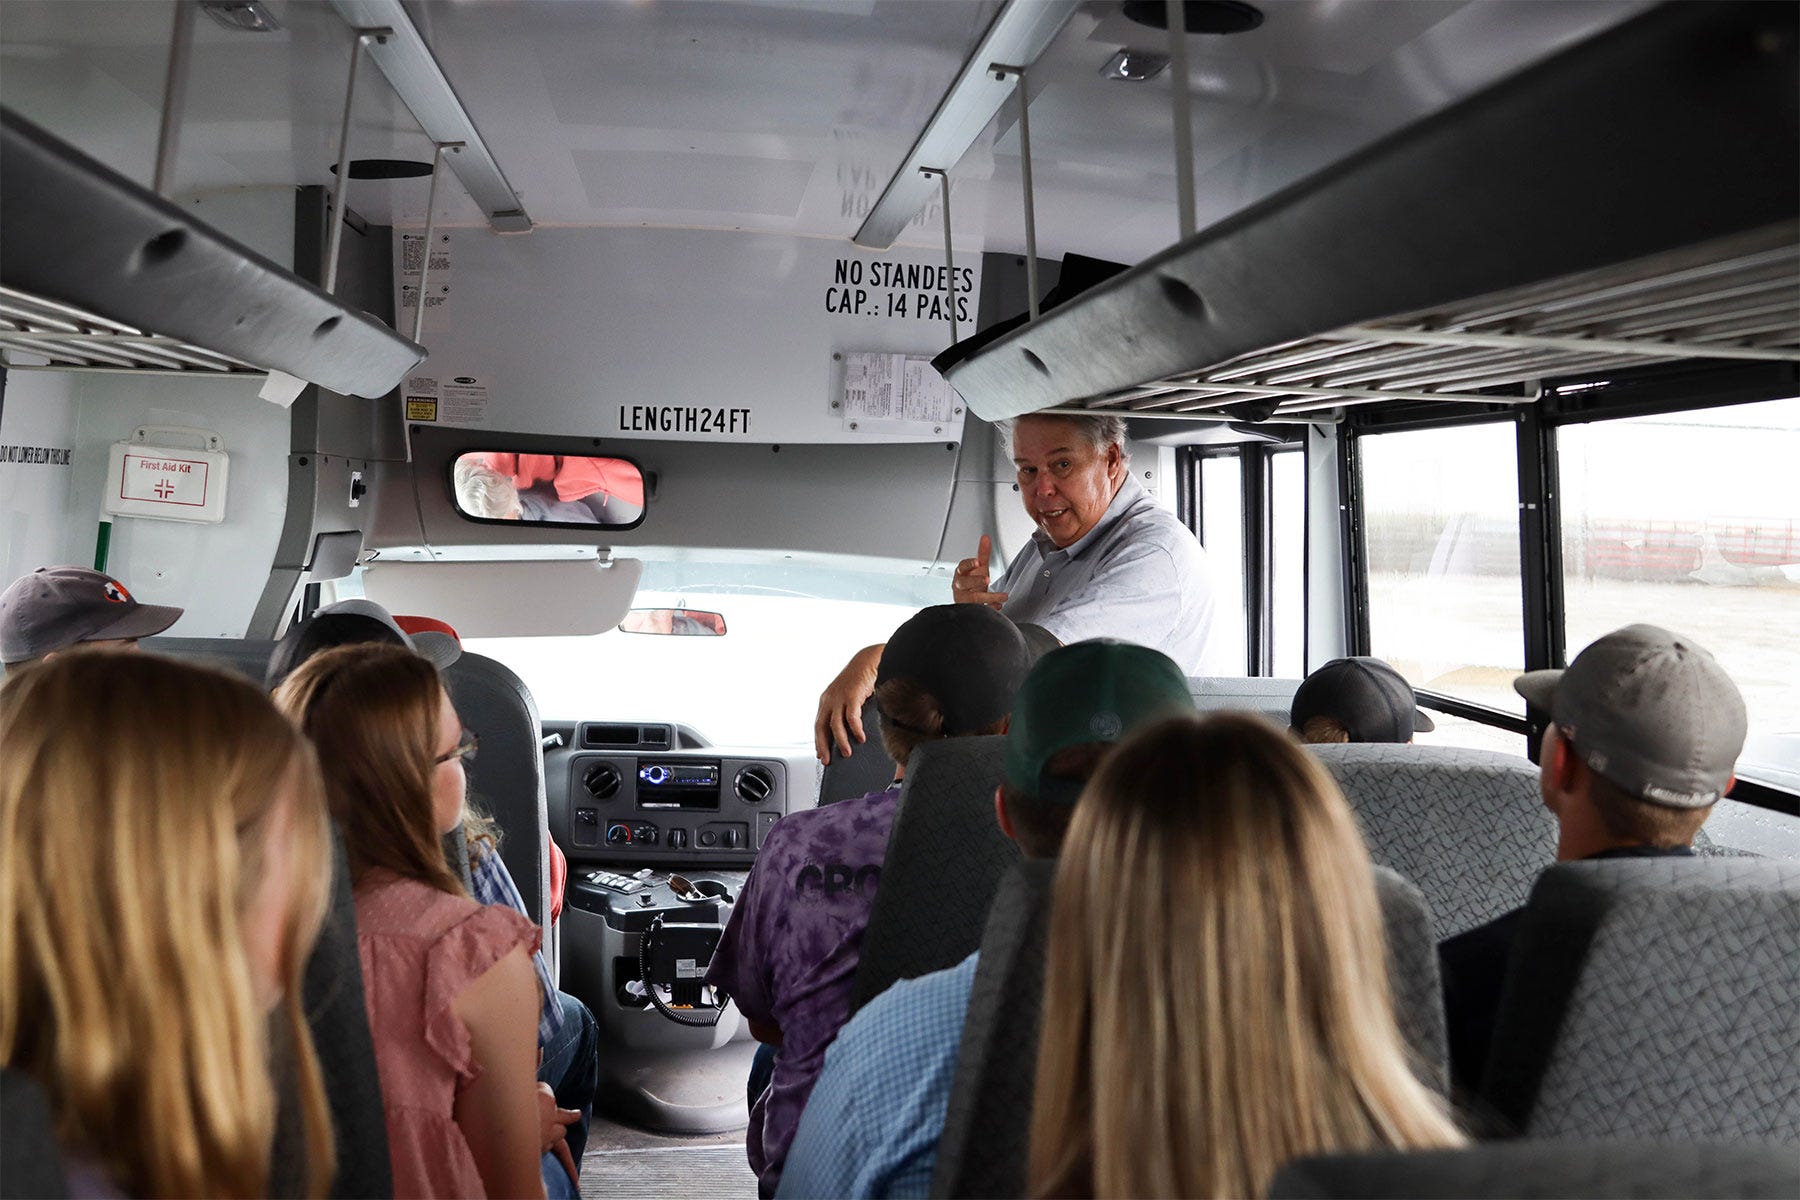 Dave Duzan, Illinois Beef Association president speaking to a bus full of people